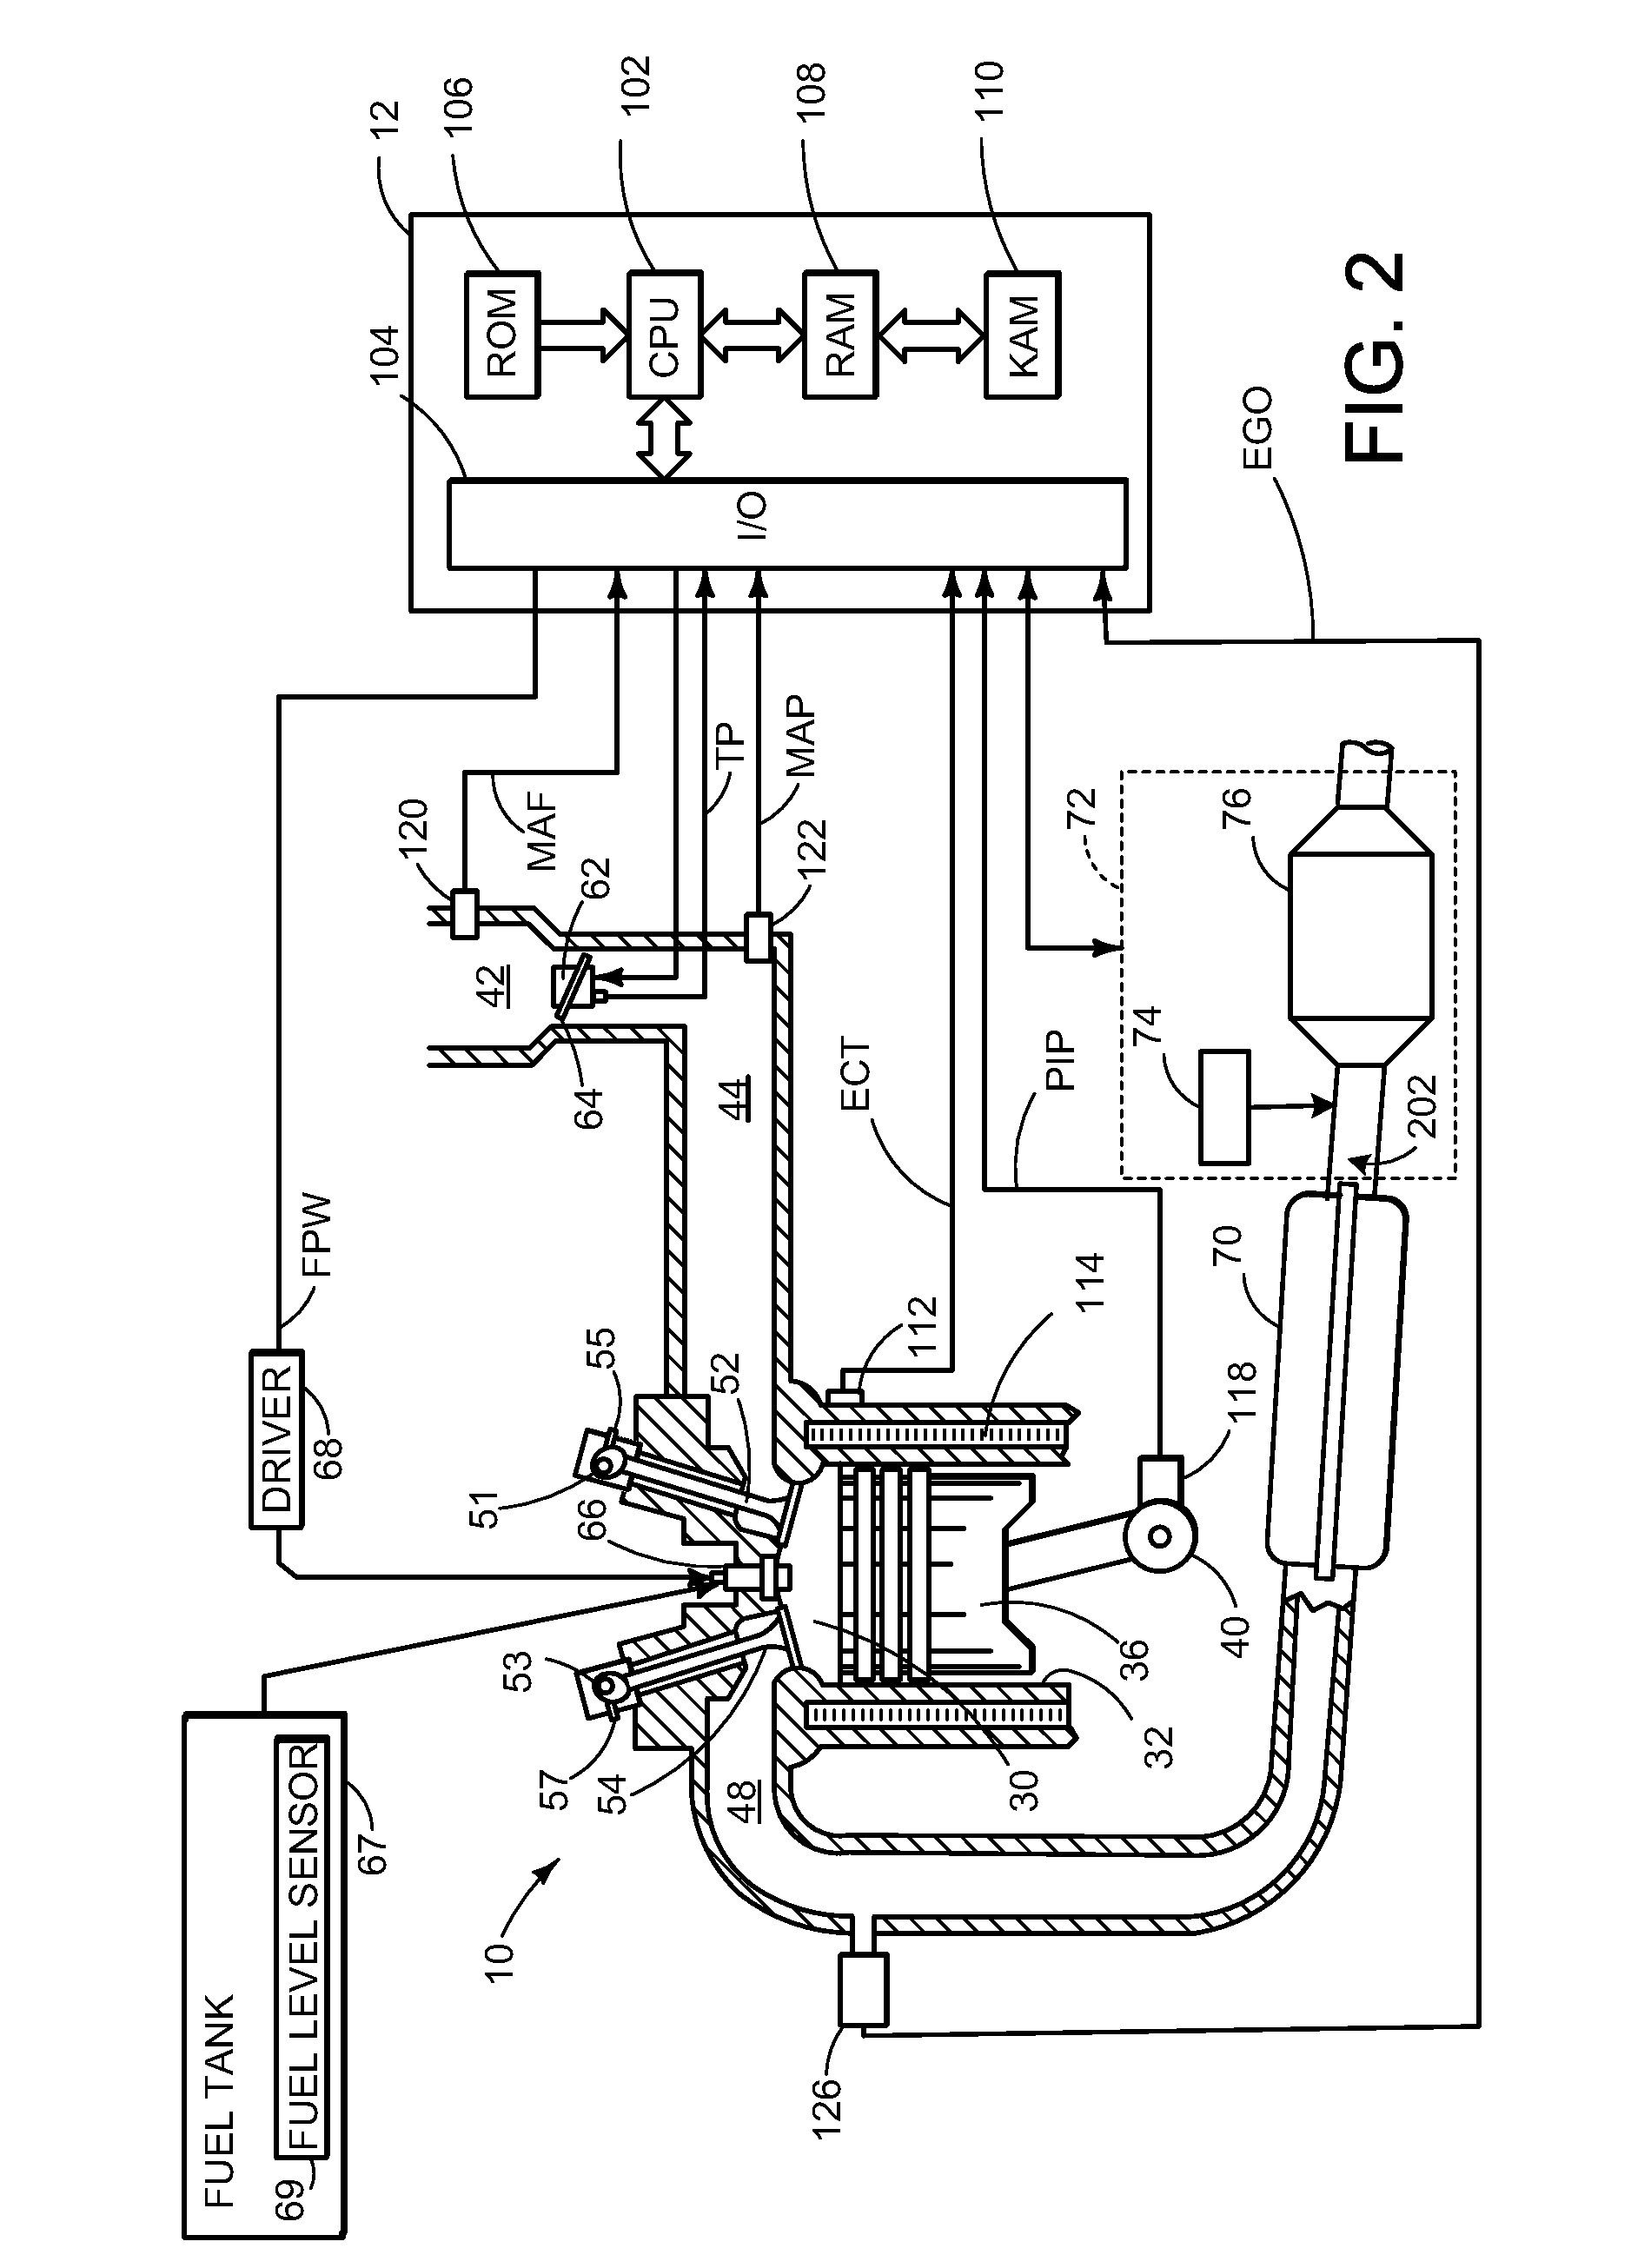 Controlling of a vehicle responsive to reductant conditions